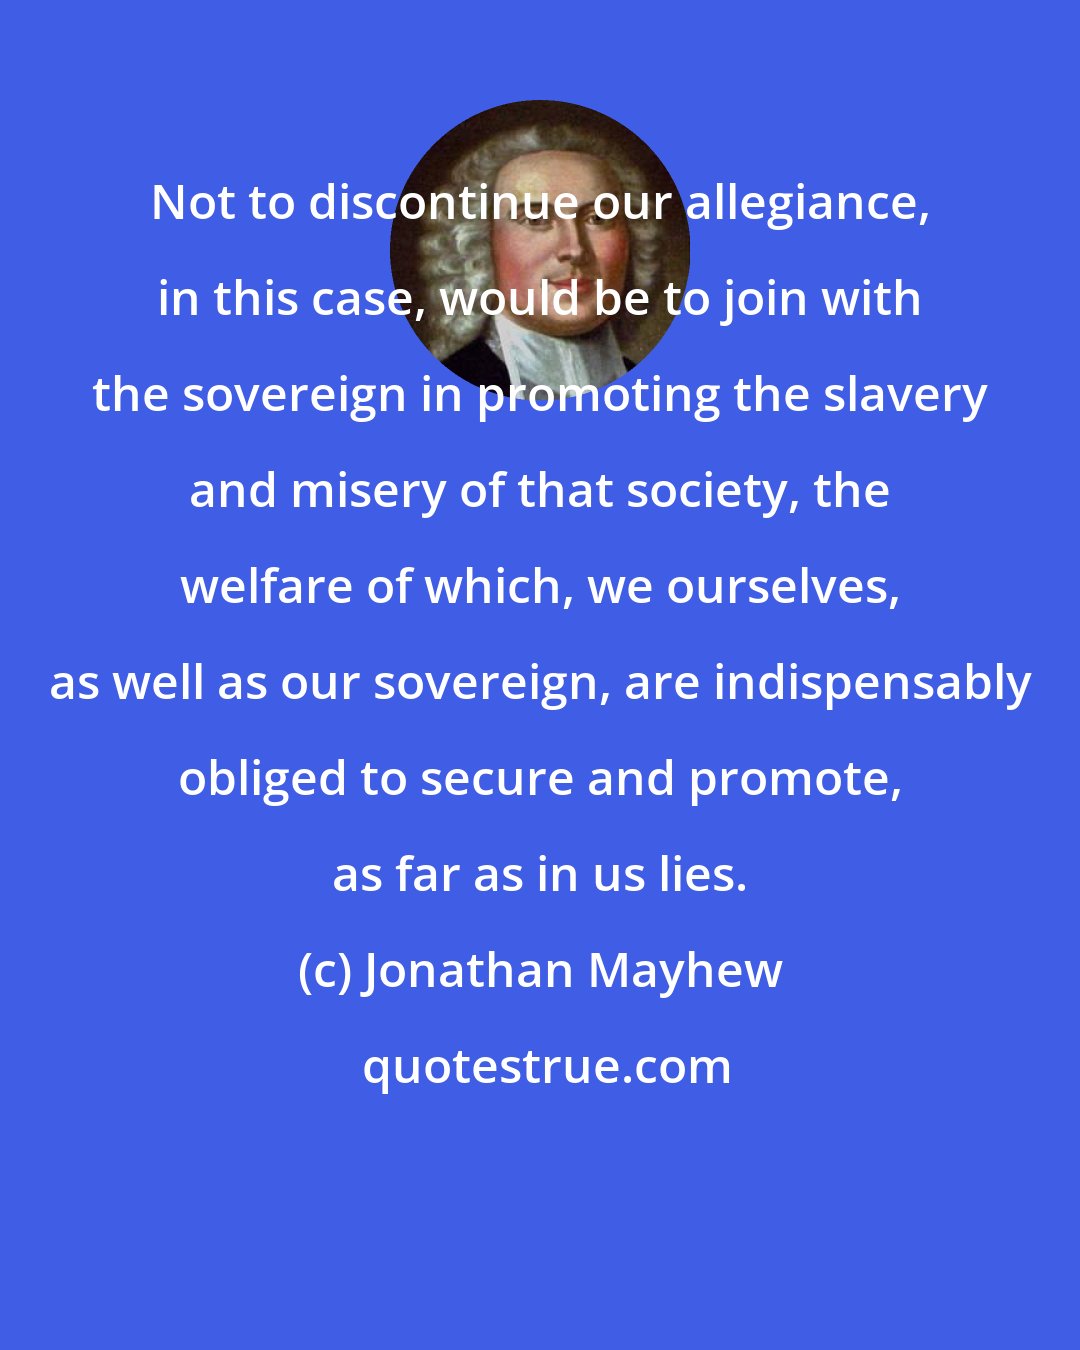 Jonathan Mayhew: Not to discontinue our allegiance, in this case, would be to join with the sovereign in promoting the slavery and misery of that society, the welfare of which, we ourselves, as well as our sovereign, are indispensably obliged to secure and promote, as far as in us lies.